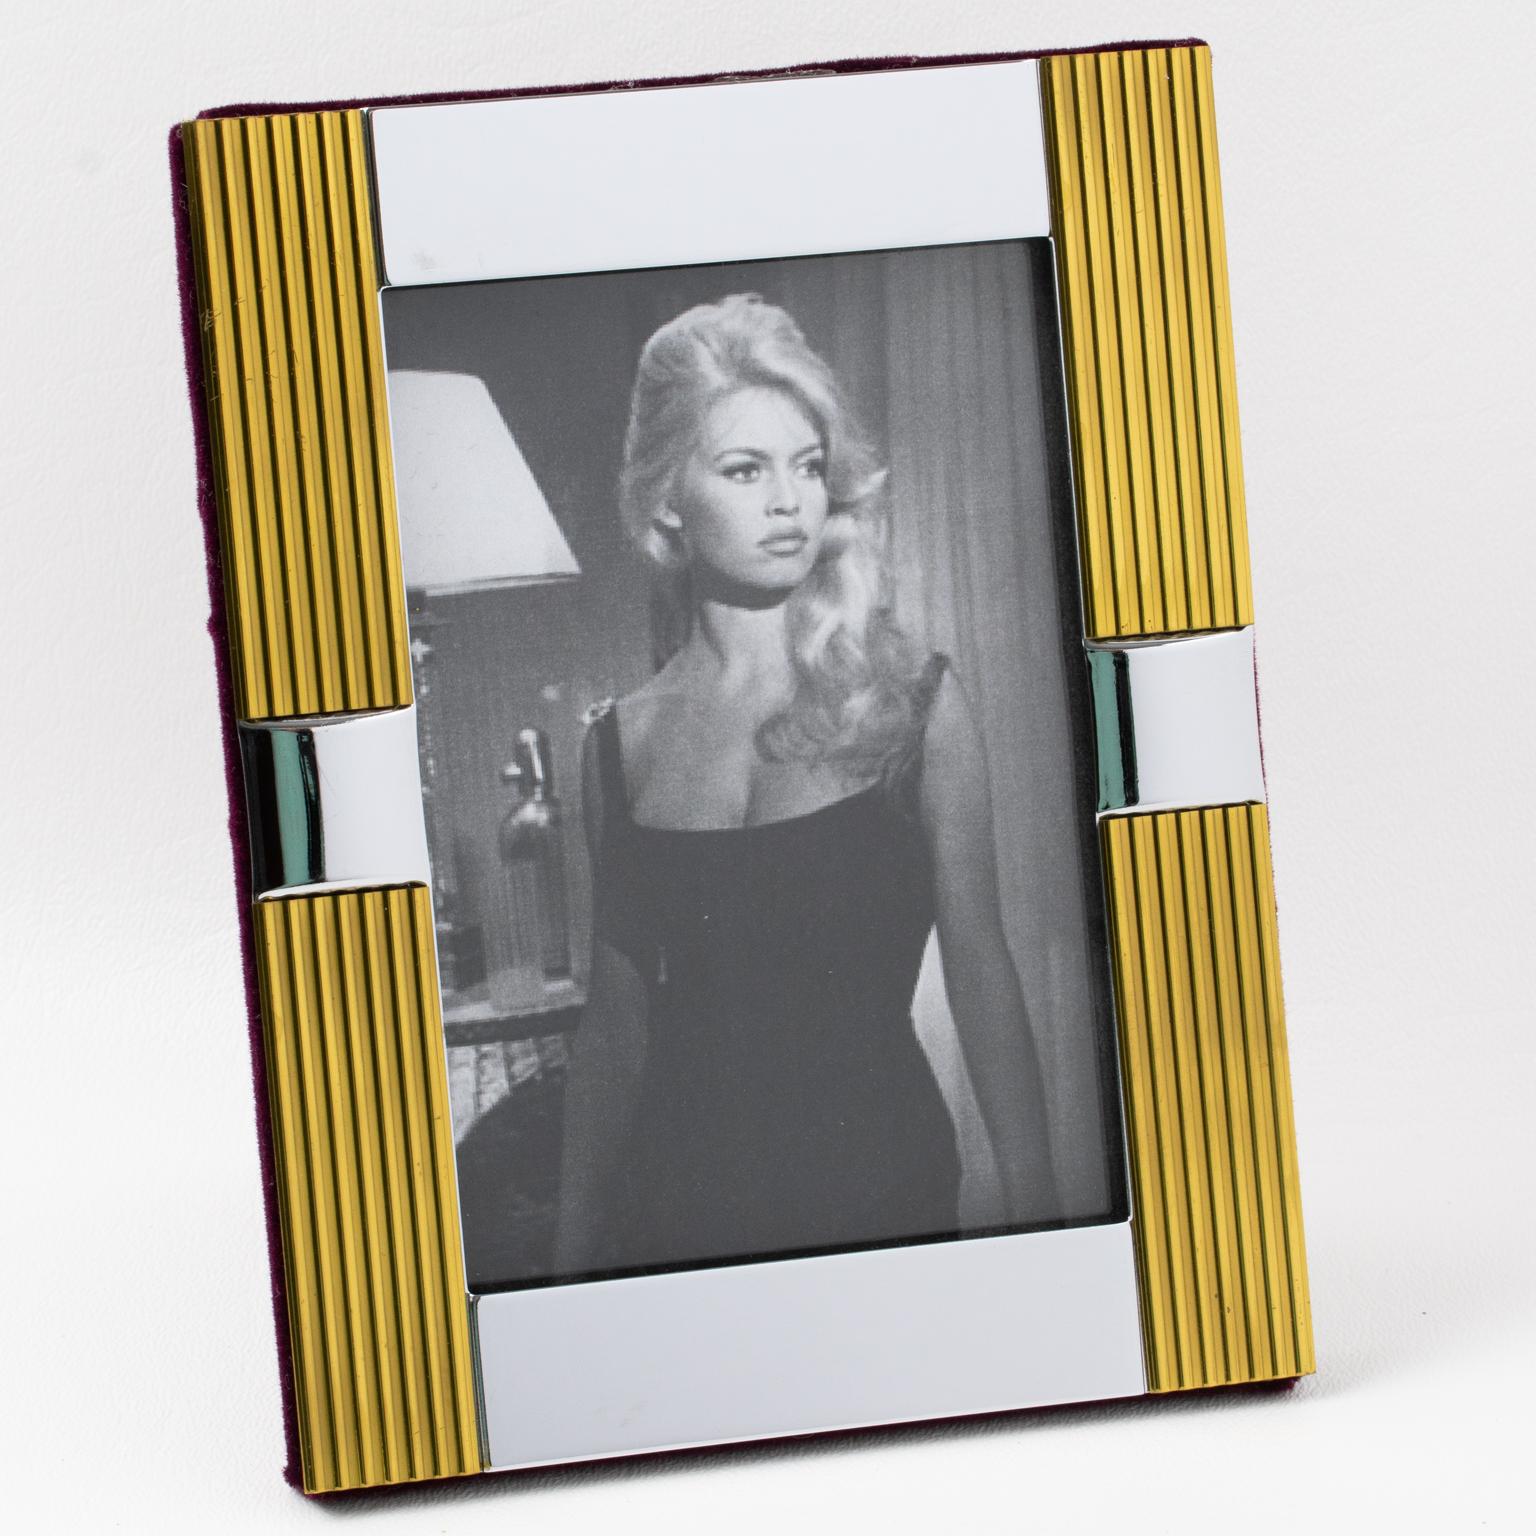 Noel BC company, Italy, crafted this charming Italian picture photo frame in the 1970s. The chrome and gilded brass metal modernist geometric design has a striped design. The easel and back are in purple velvet, and a glass insert is on the front to